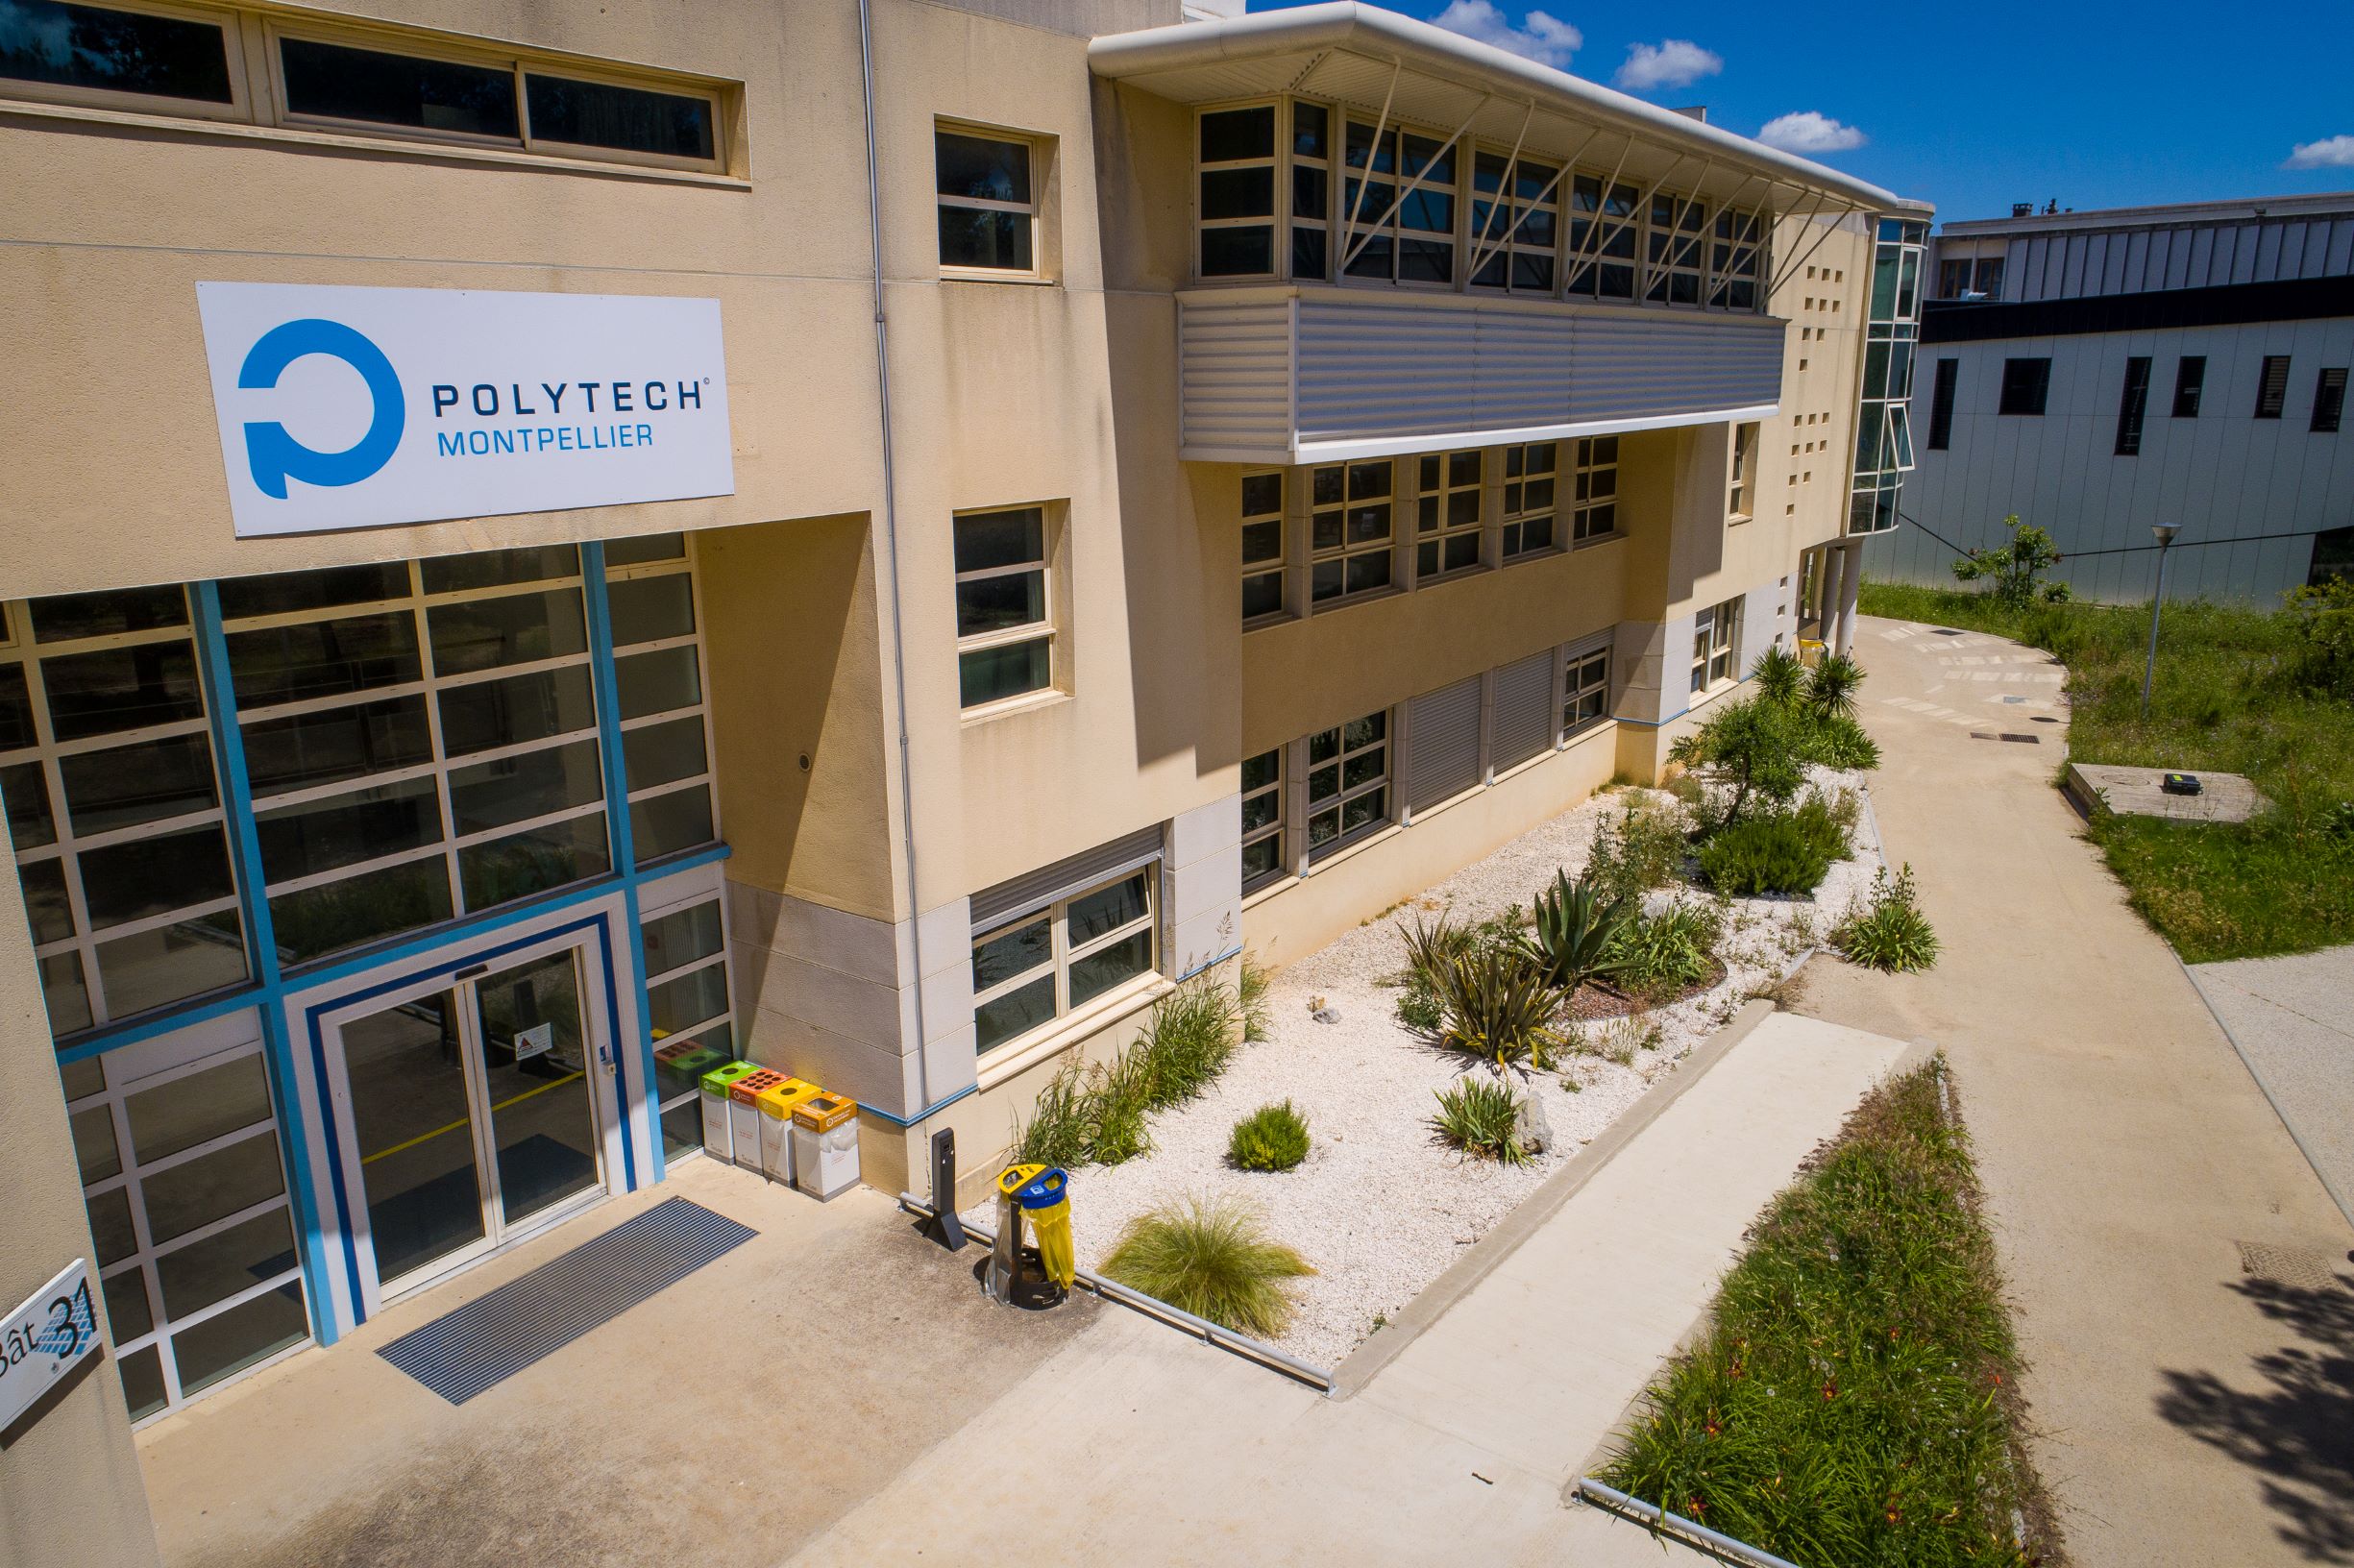 Polytechnique Montpellier (from its Website）